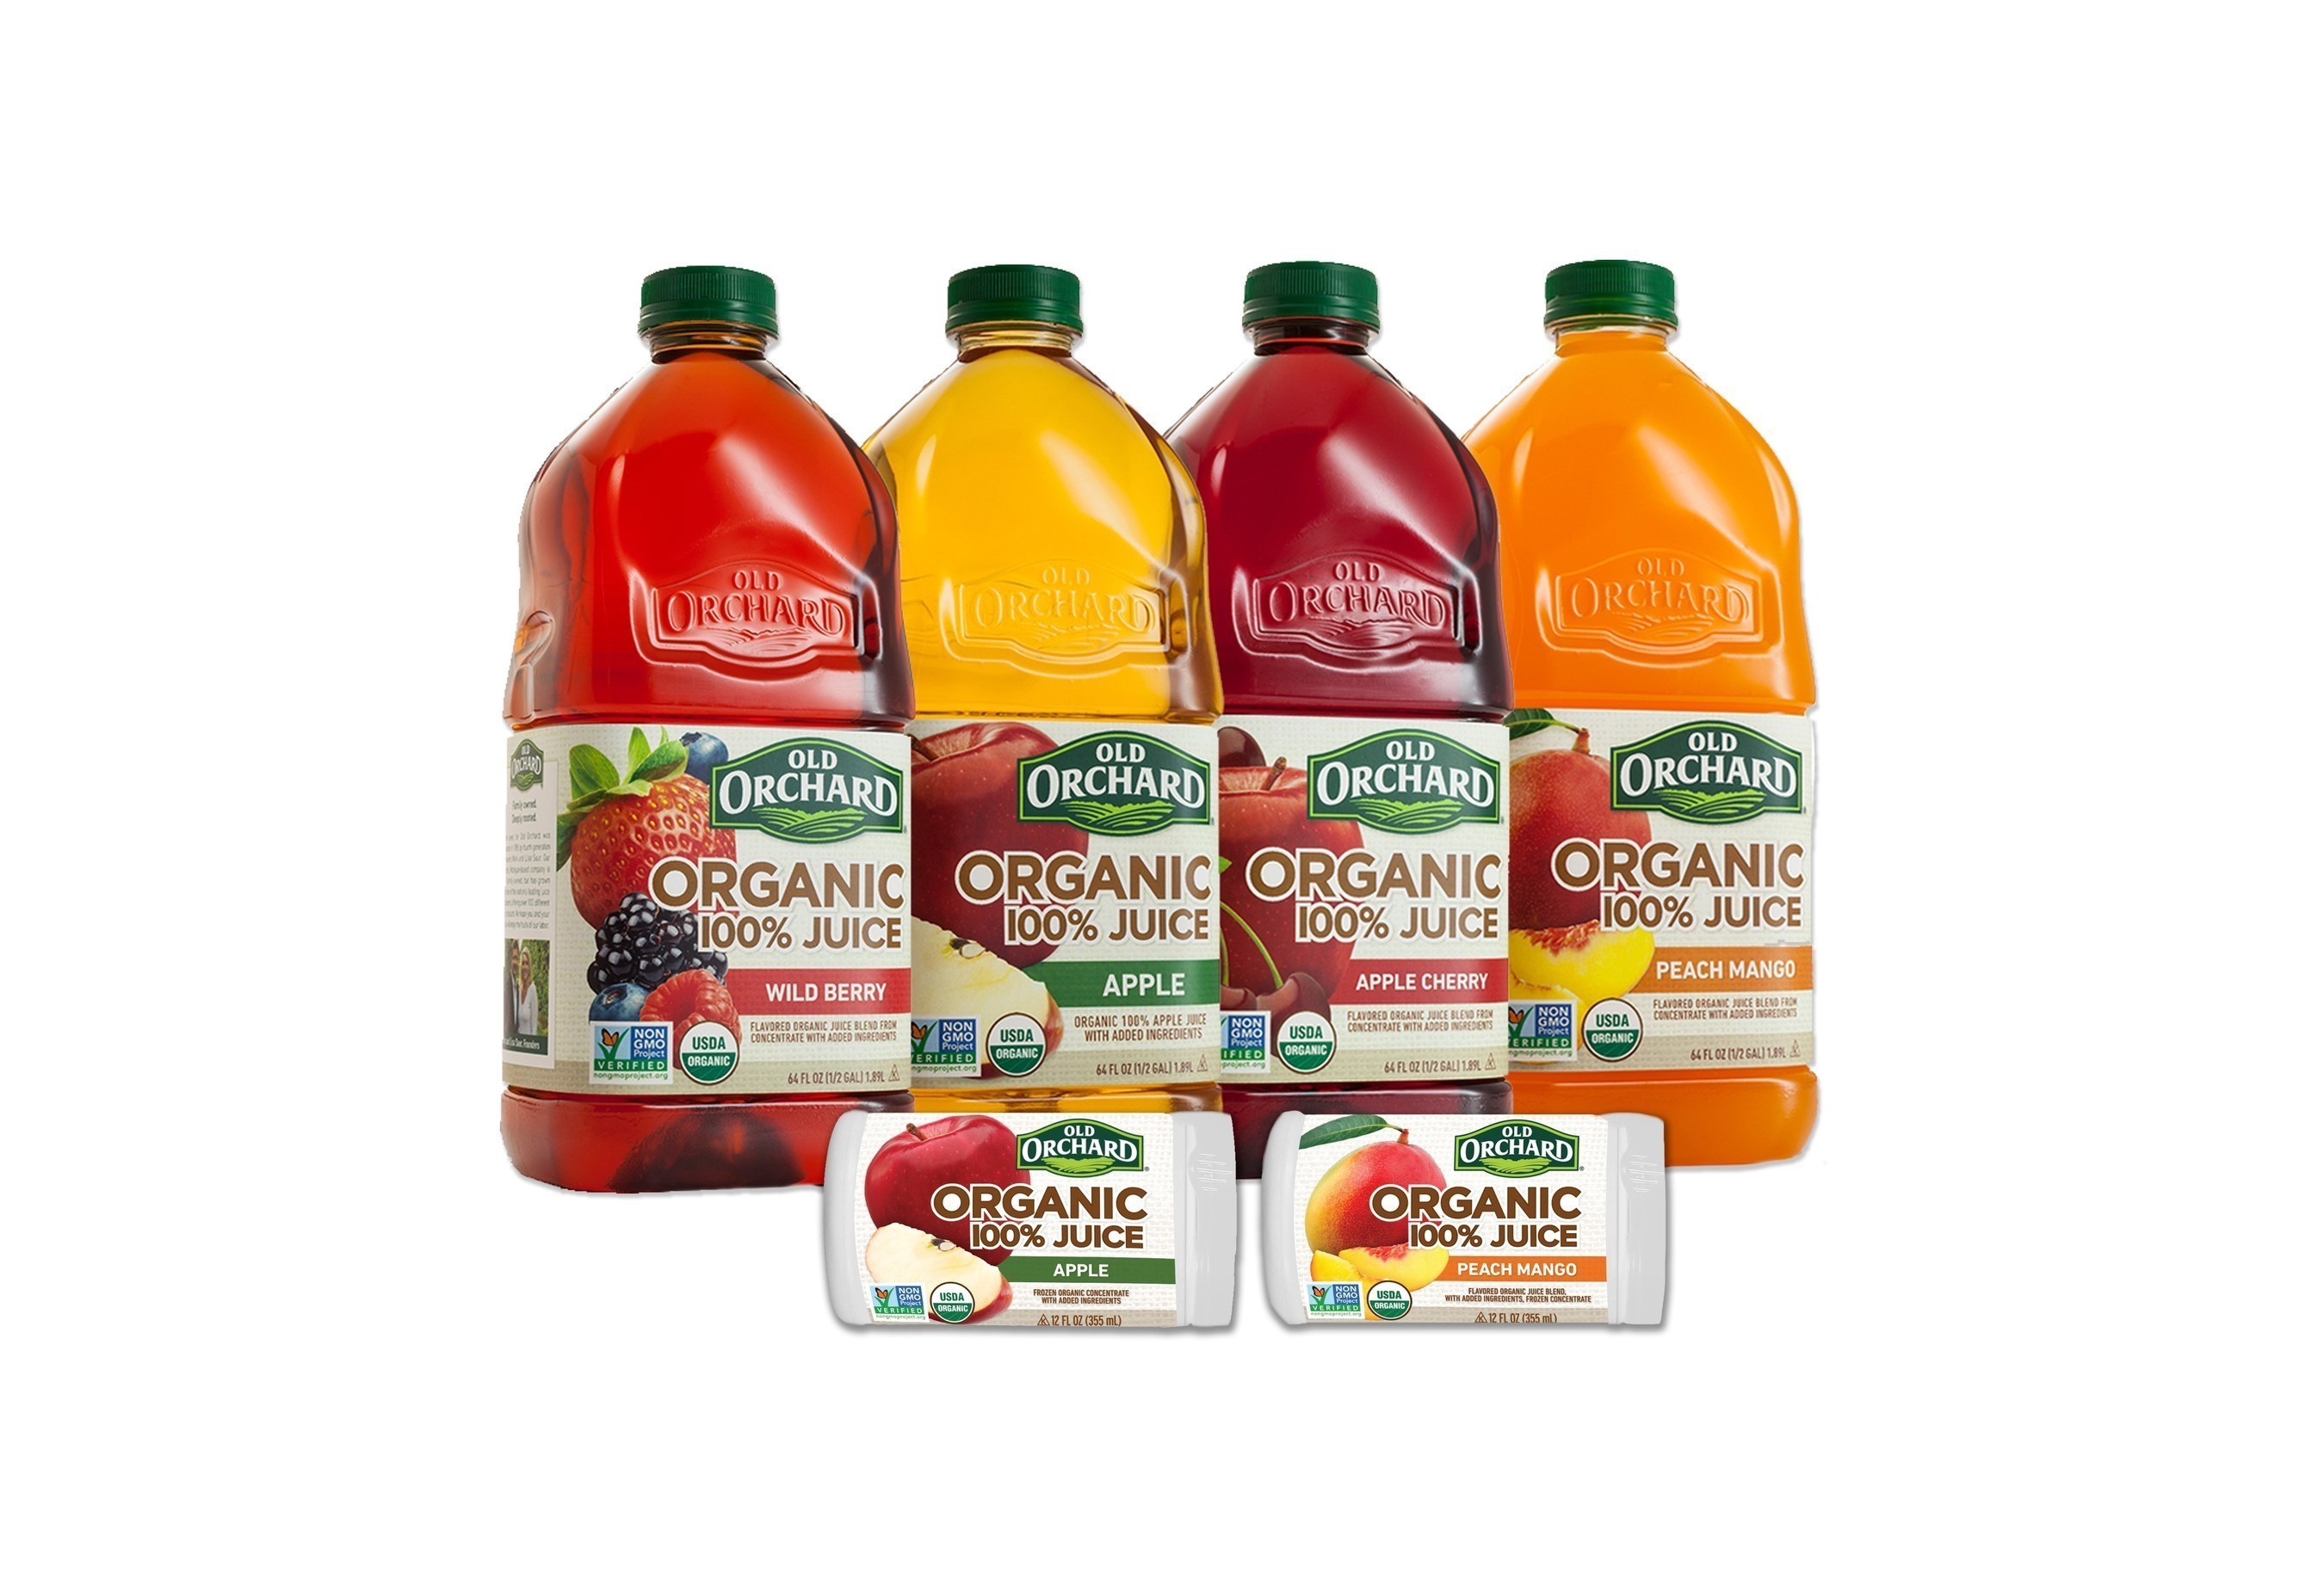 Old Orchard Brands(R) raises the stakes in affordable, quality fruit juice with new line of organic, Non-GMO 100% juice blends